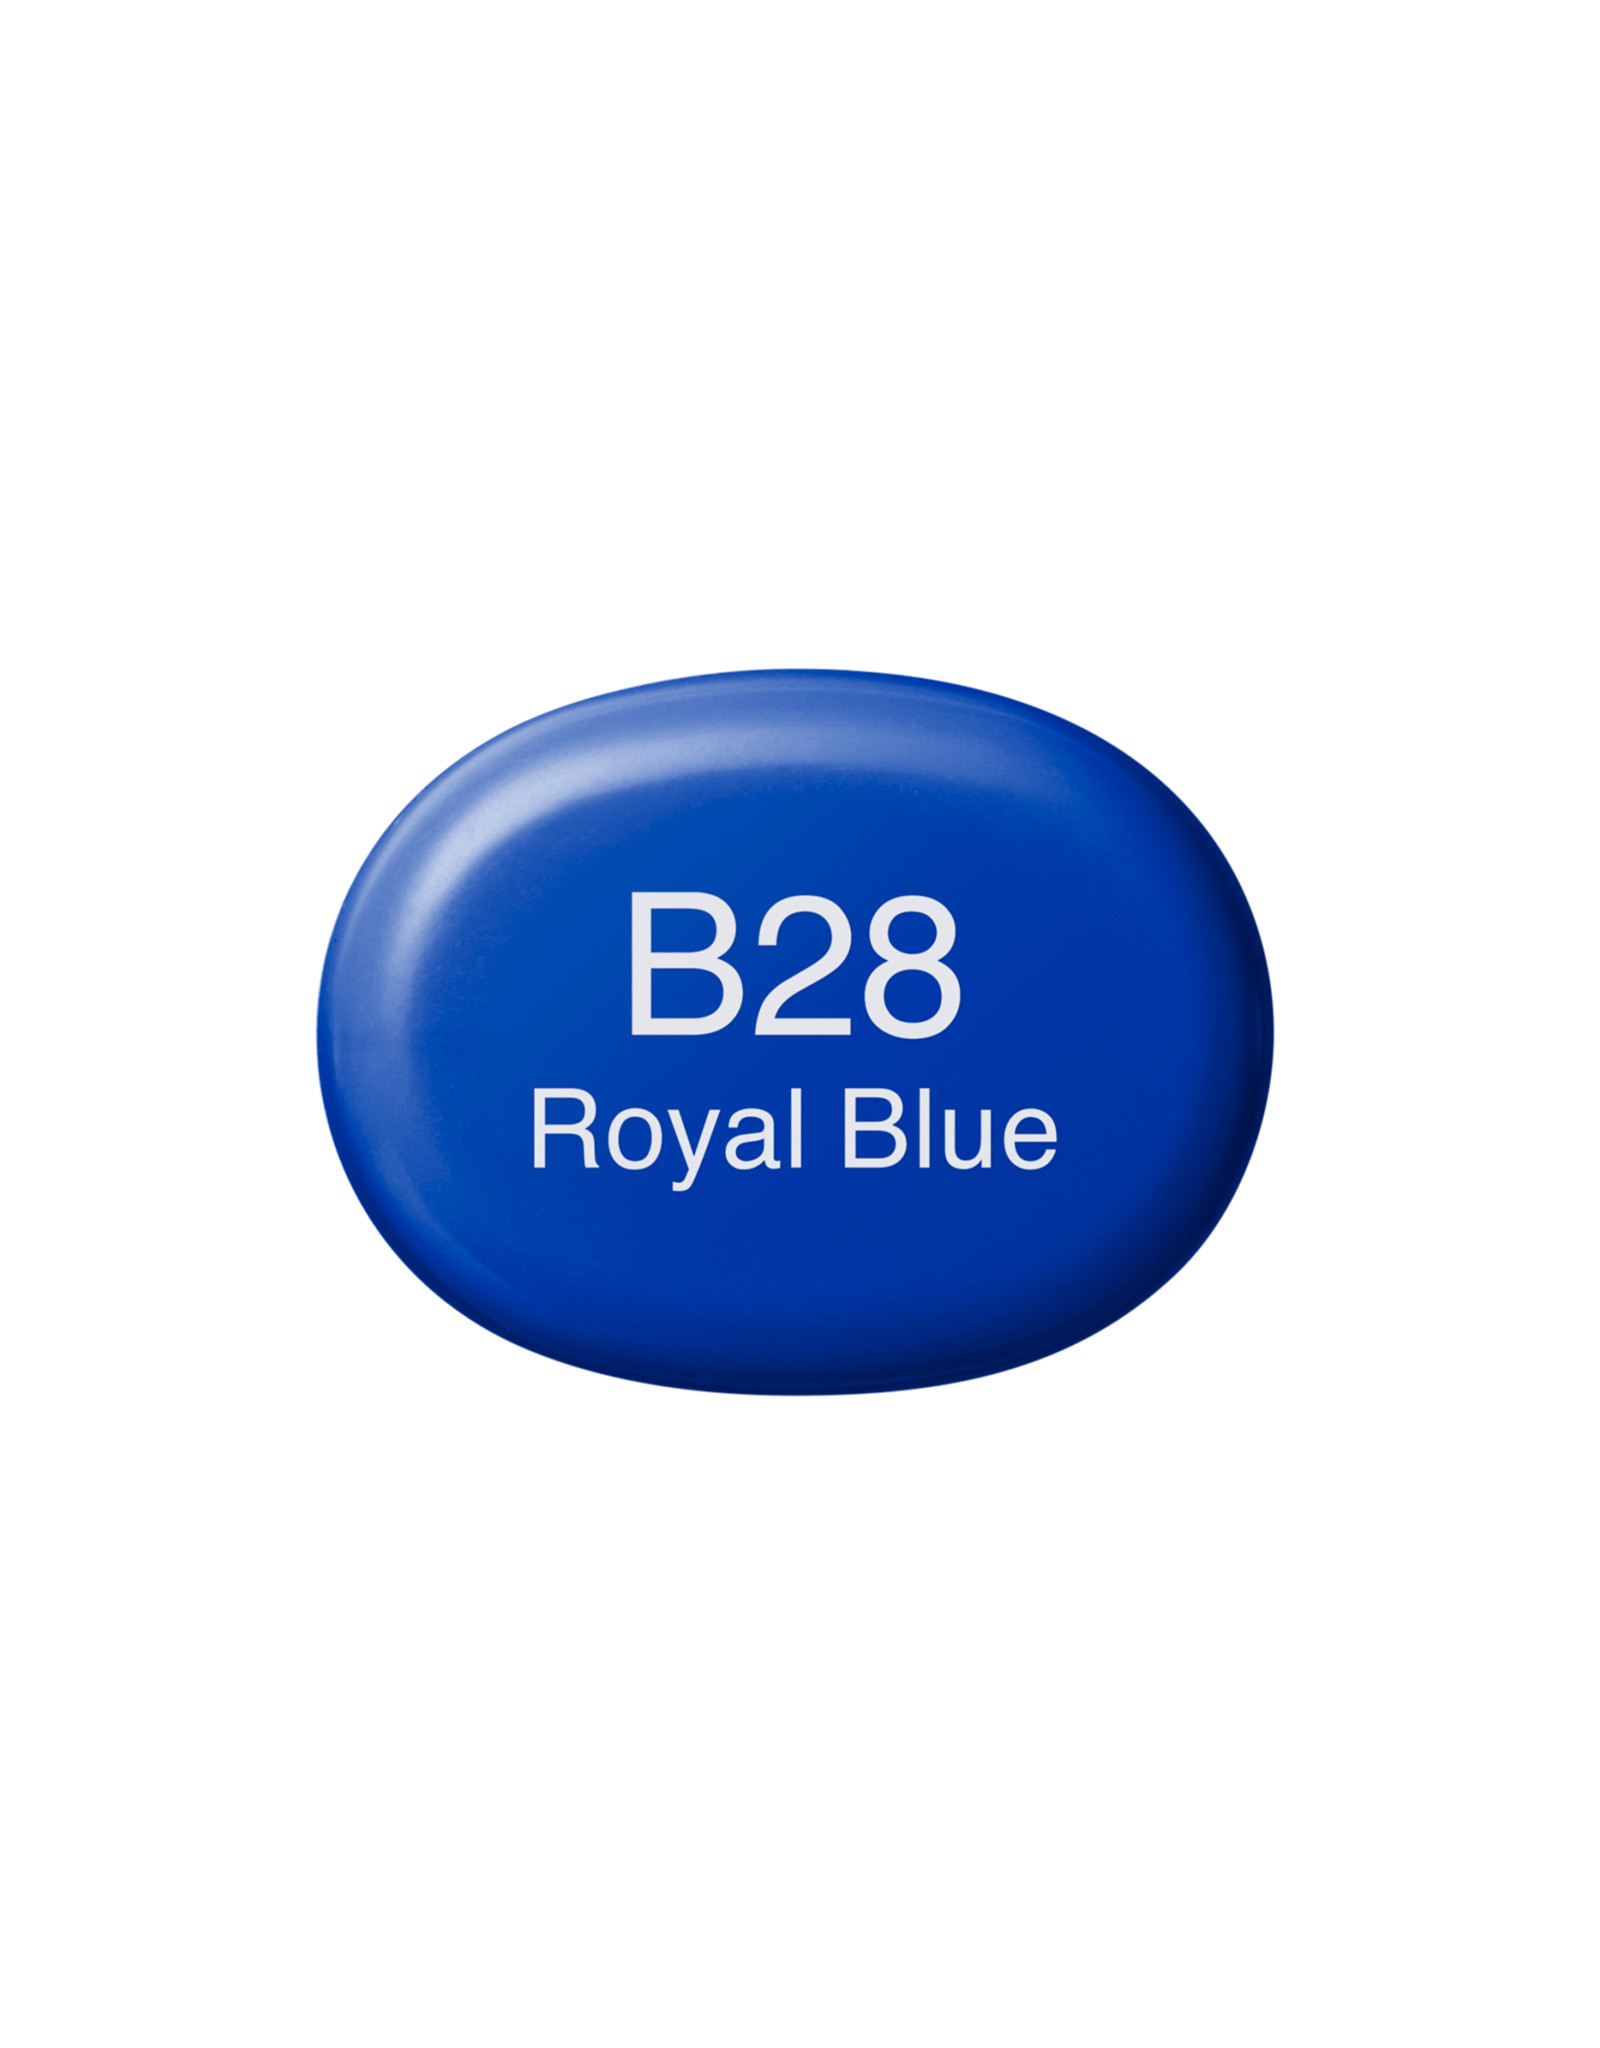 COPIC COPIC Sketch Marker B28 Royal Blue